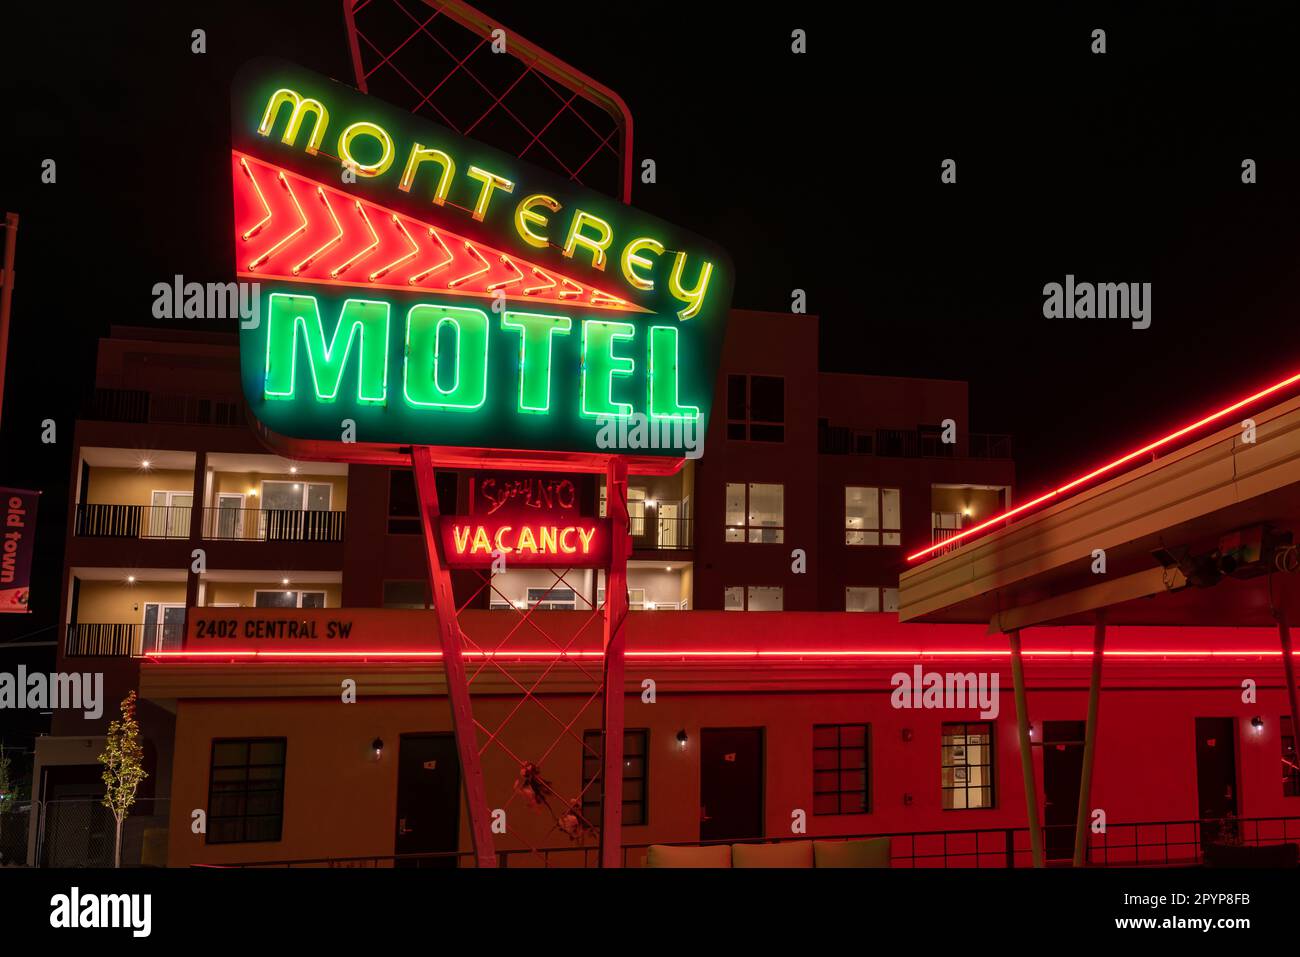 Retro sign, googie architecture, and a one-story section of the Monterey Motel on Route 66 in Old Town in Albuquerque, New Mexico, United States. Stock Photo